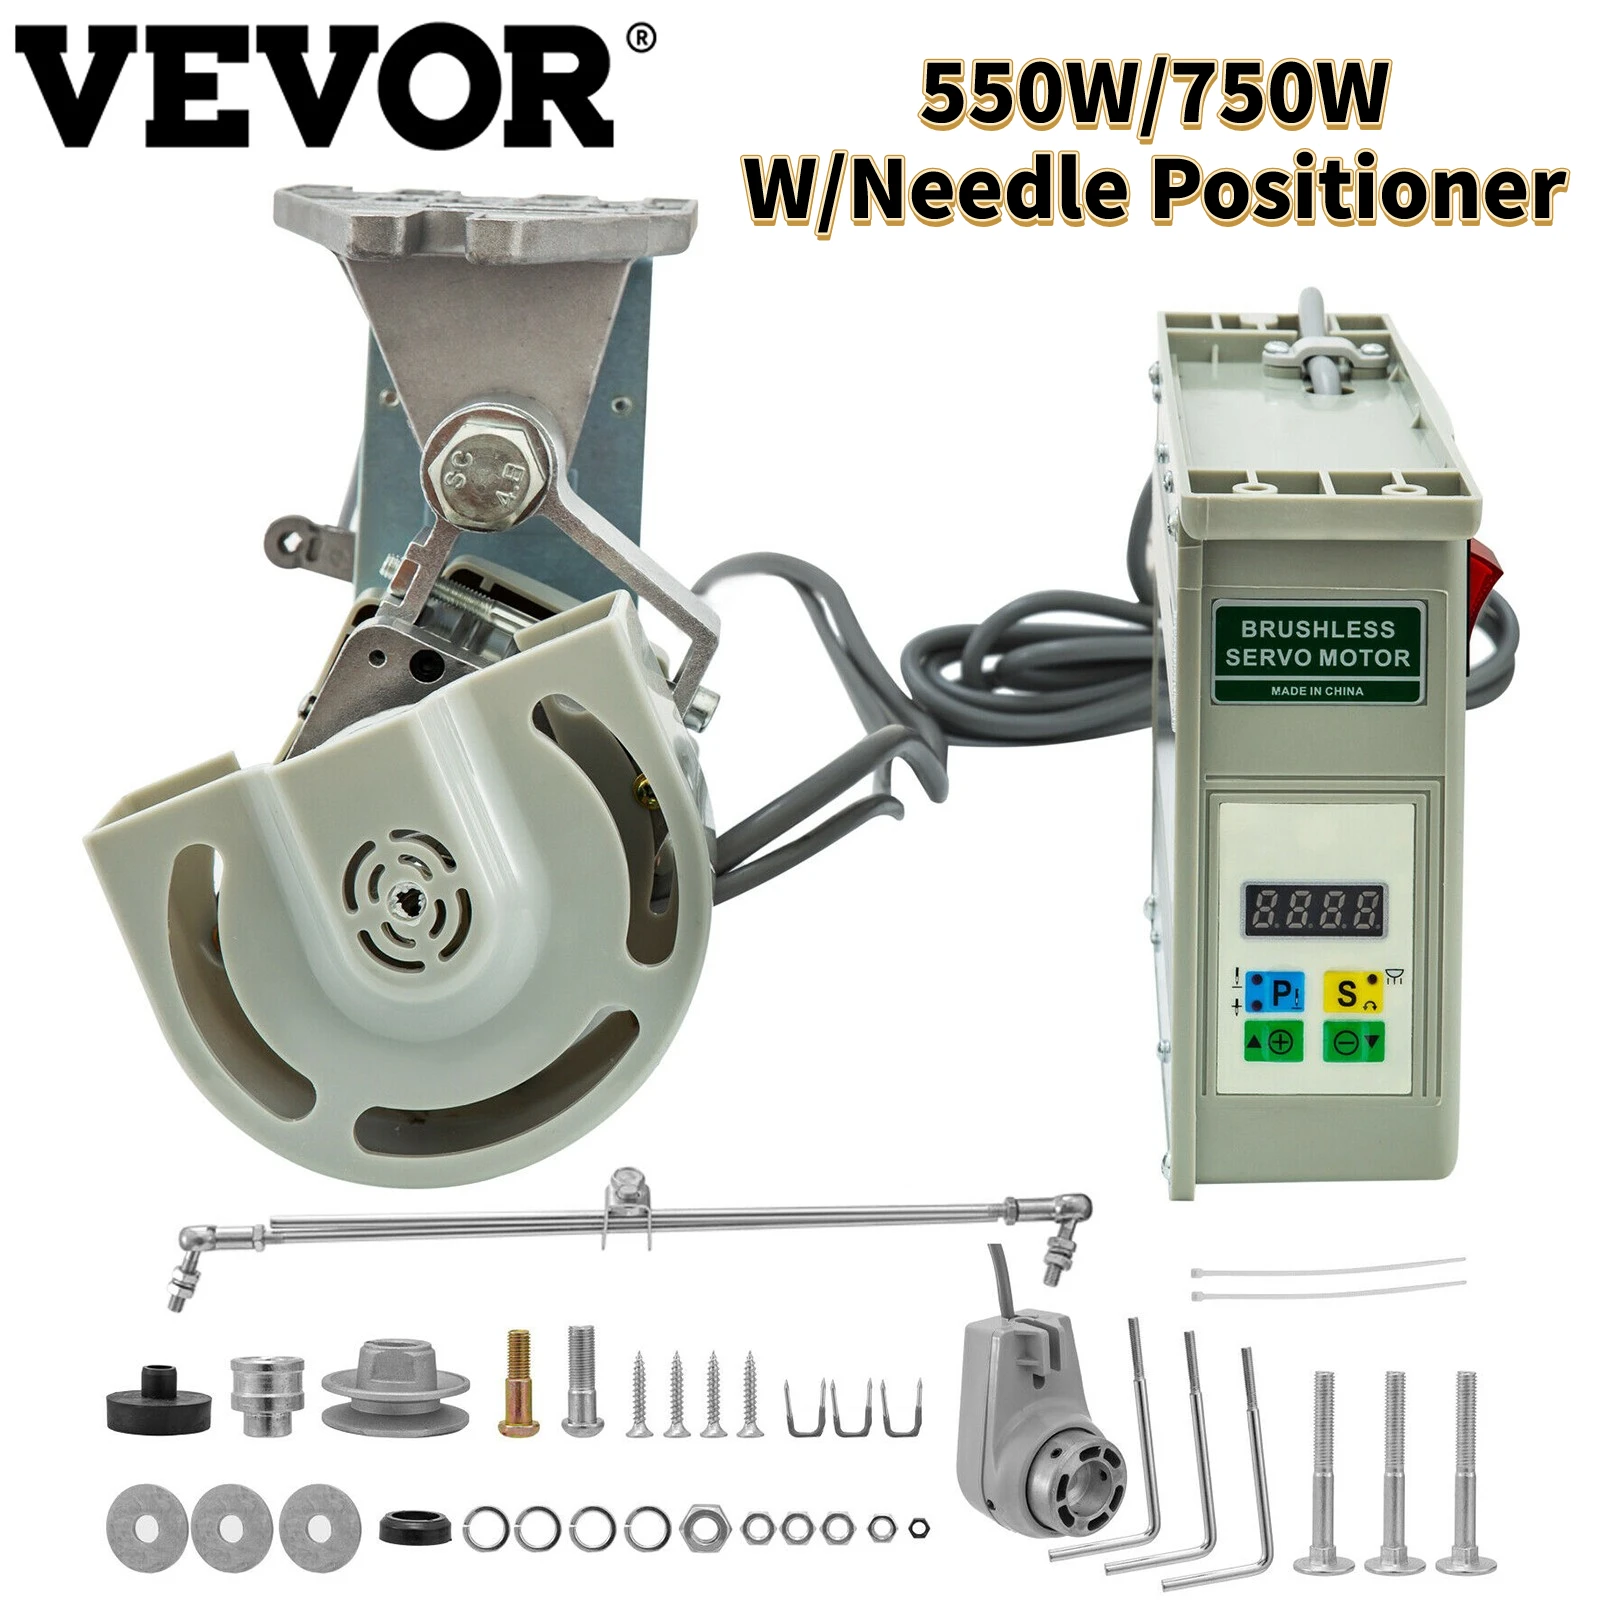 

VEVOR Industrial Sewing Machine Servo Motor W/ Needle Positioner 550W 750W Pure Copper Coil Clutch Motor Brushless 500-4500RPM